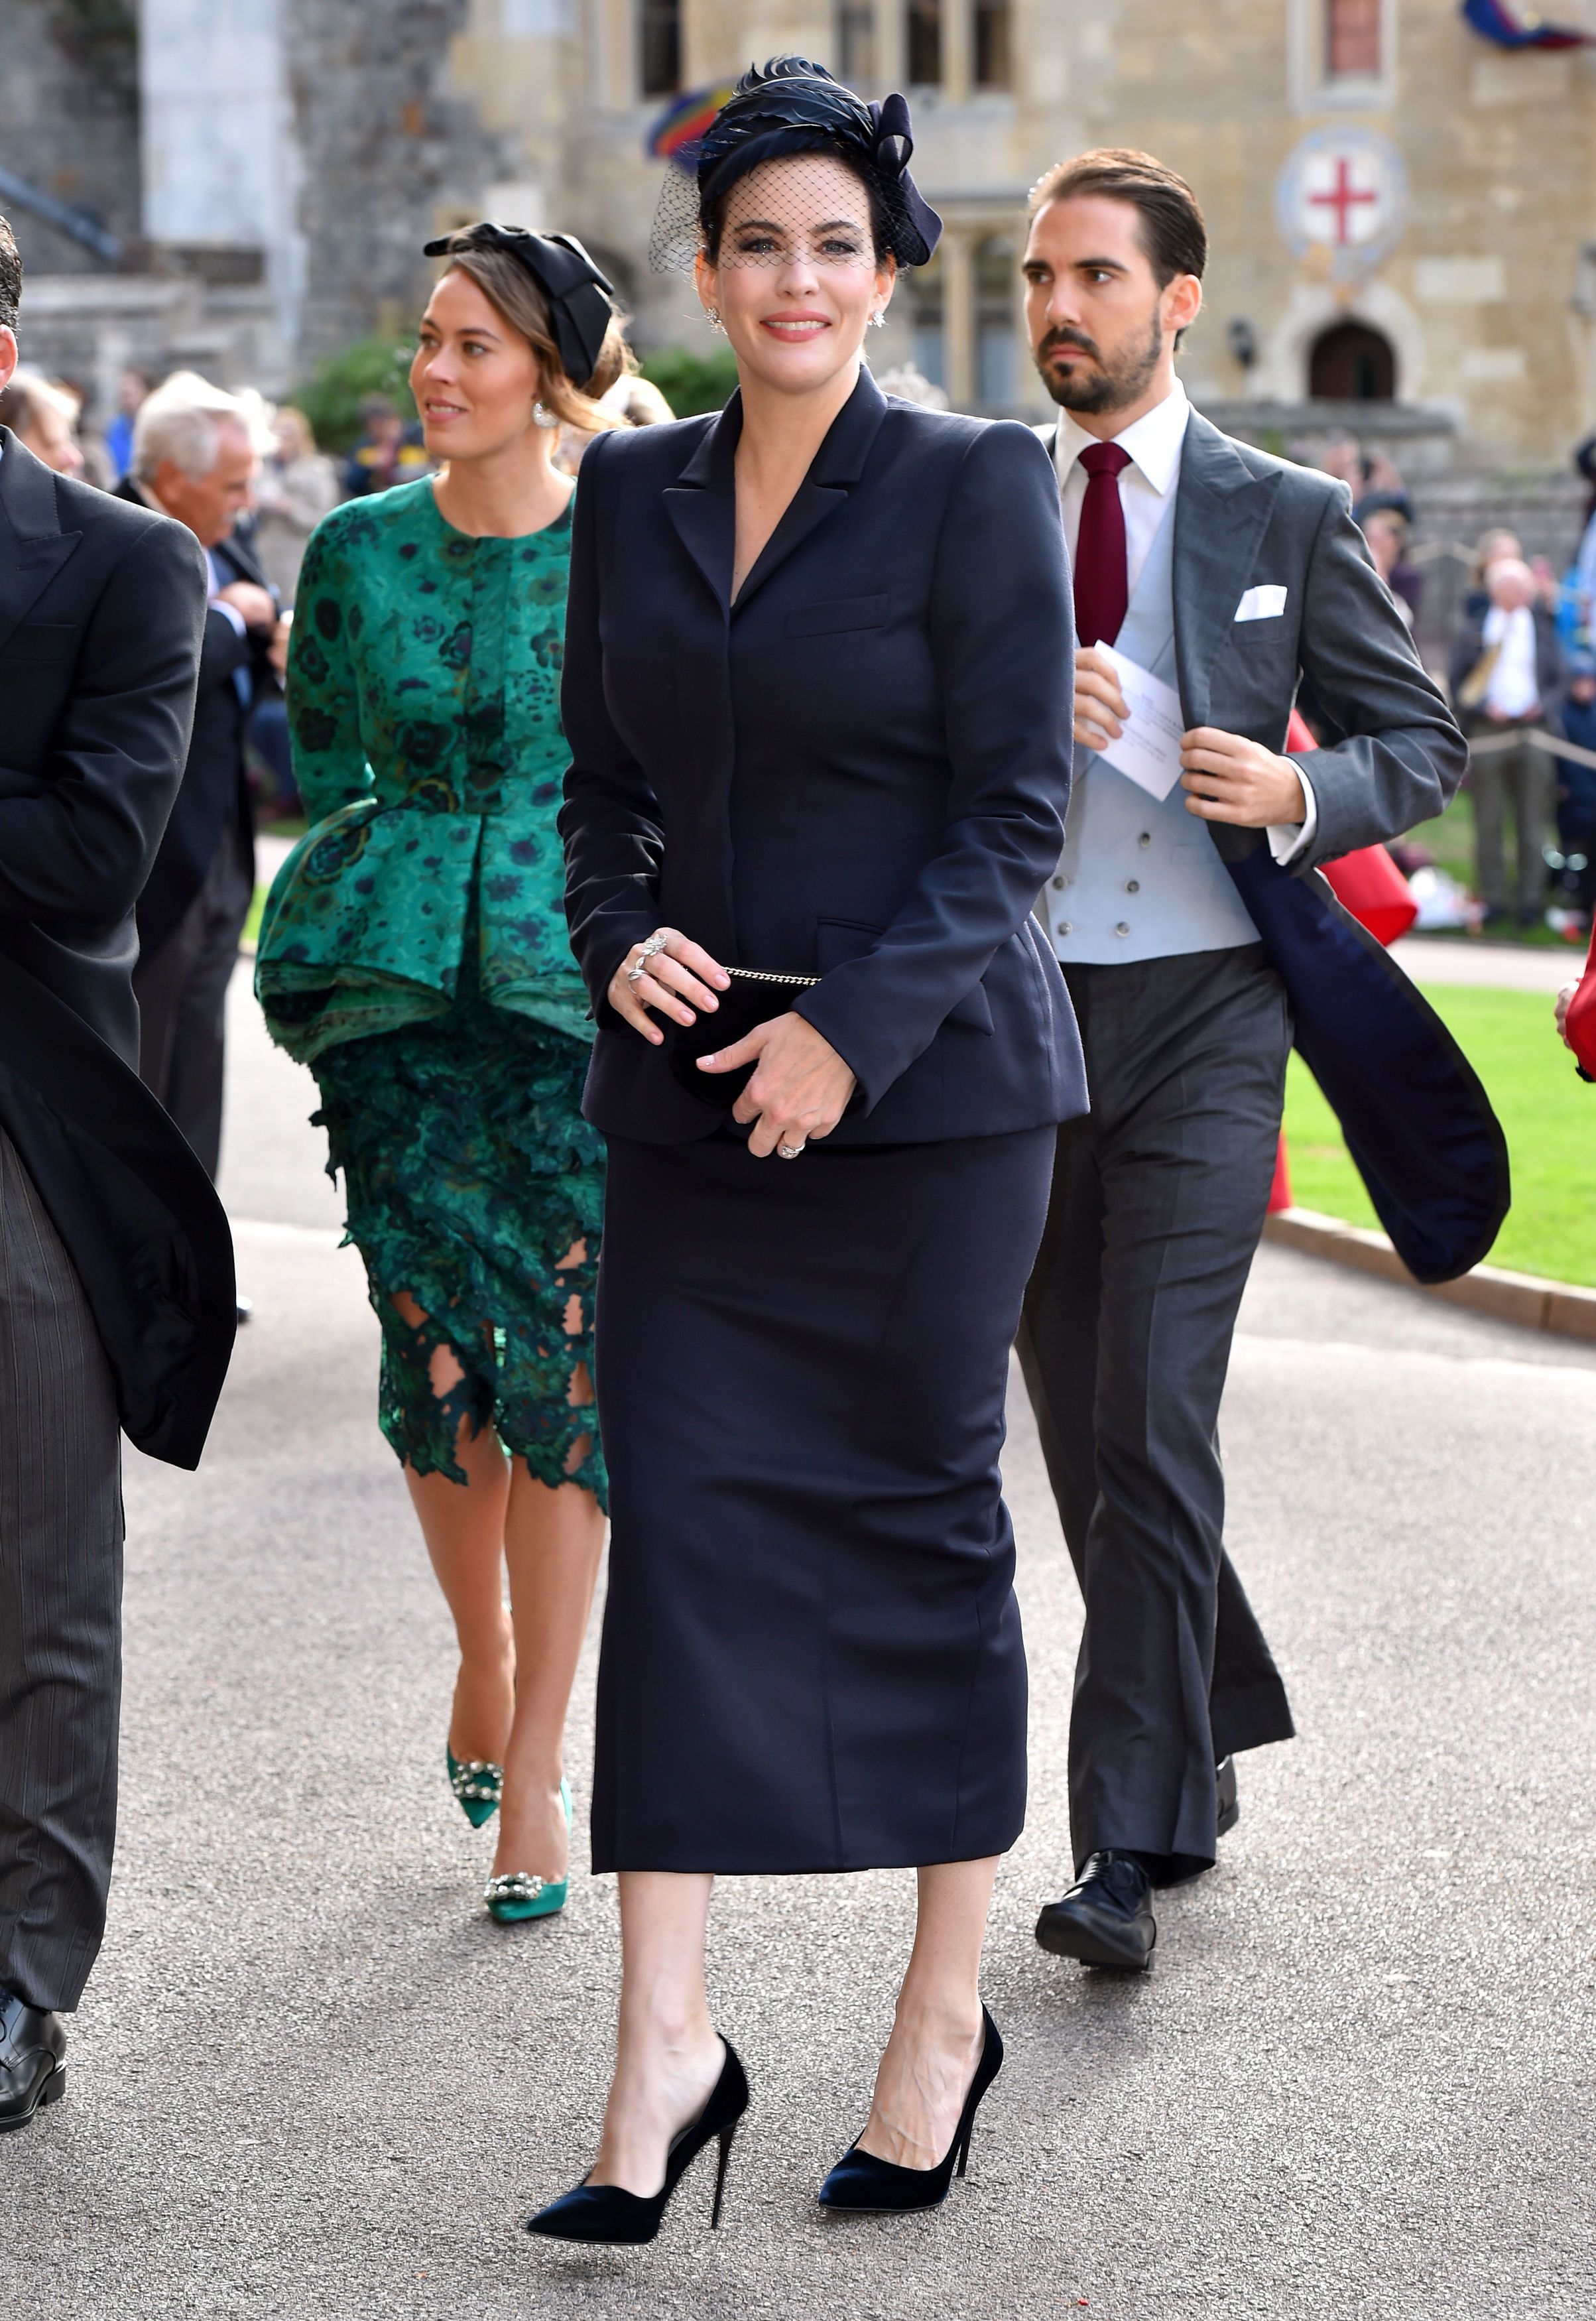 Princess Eugenie Wedding Guests - The Outfits The Royals and A-Listers Wore